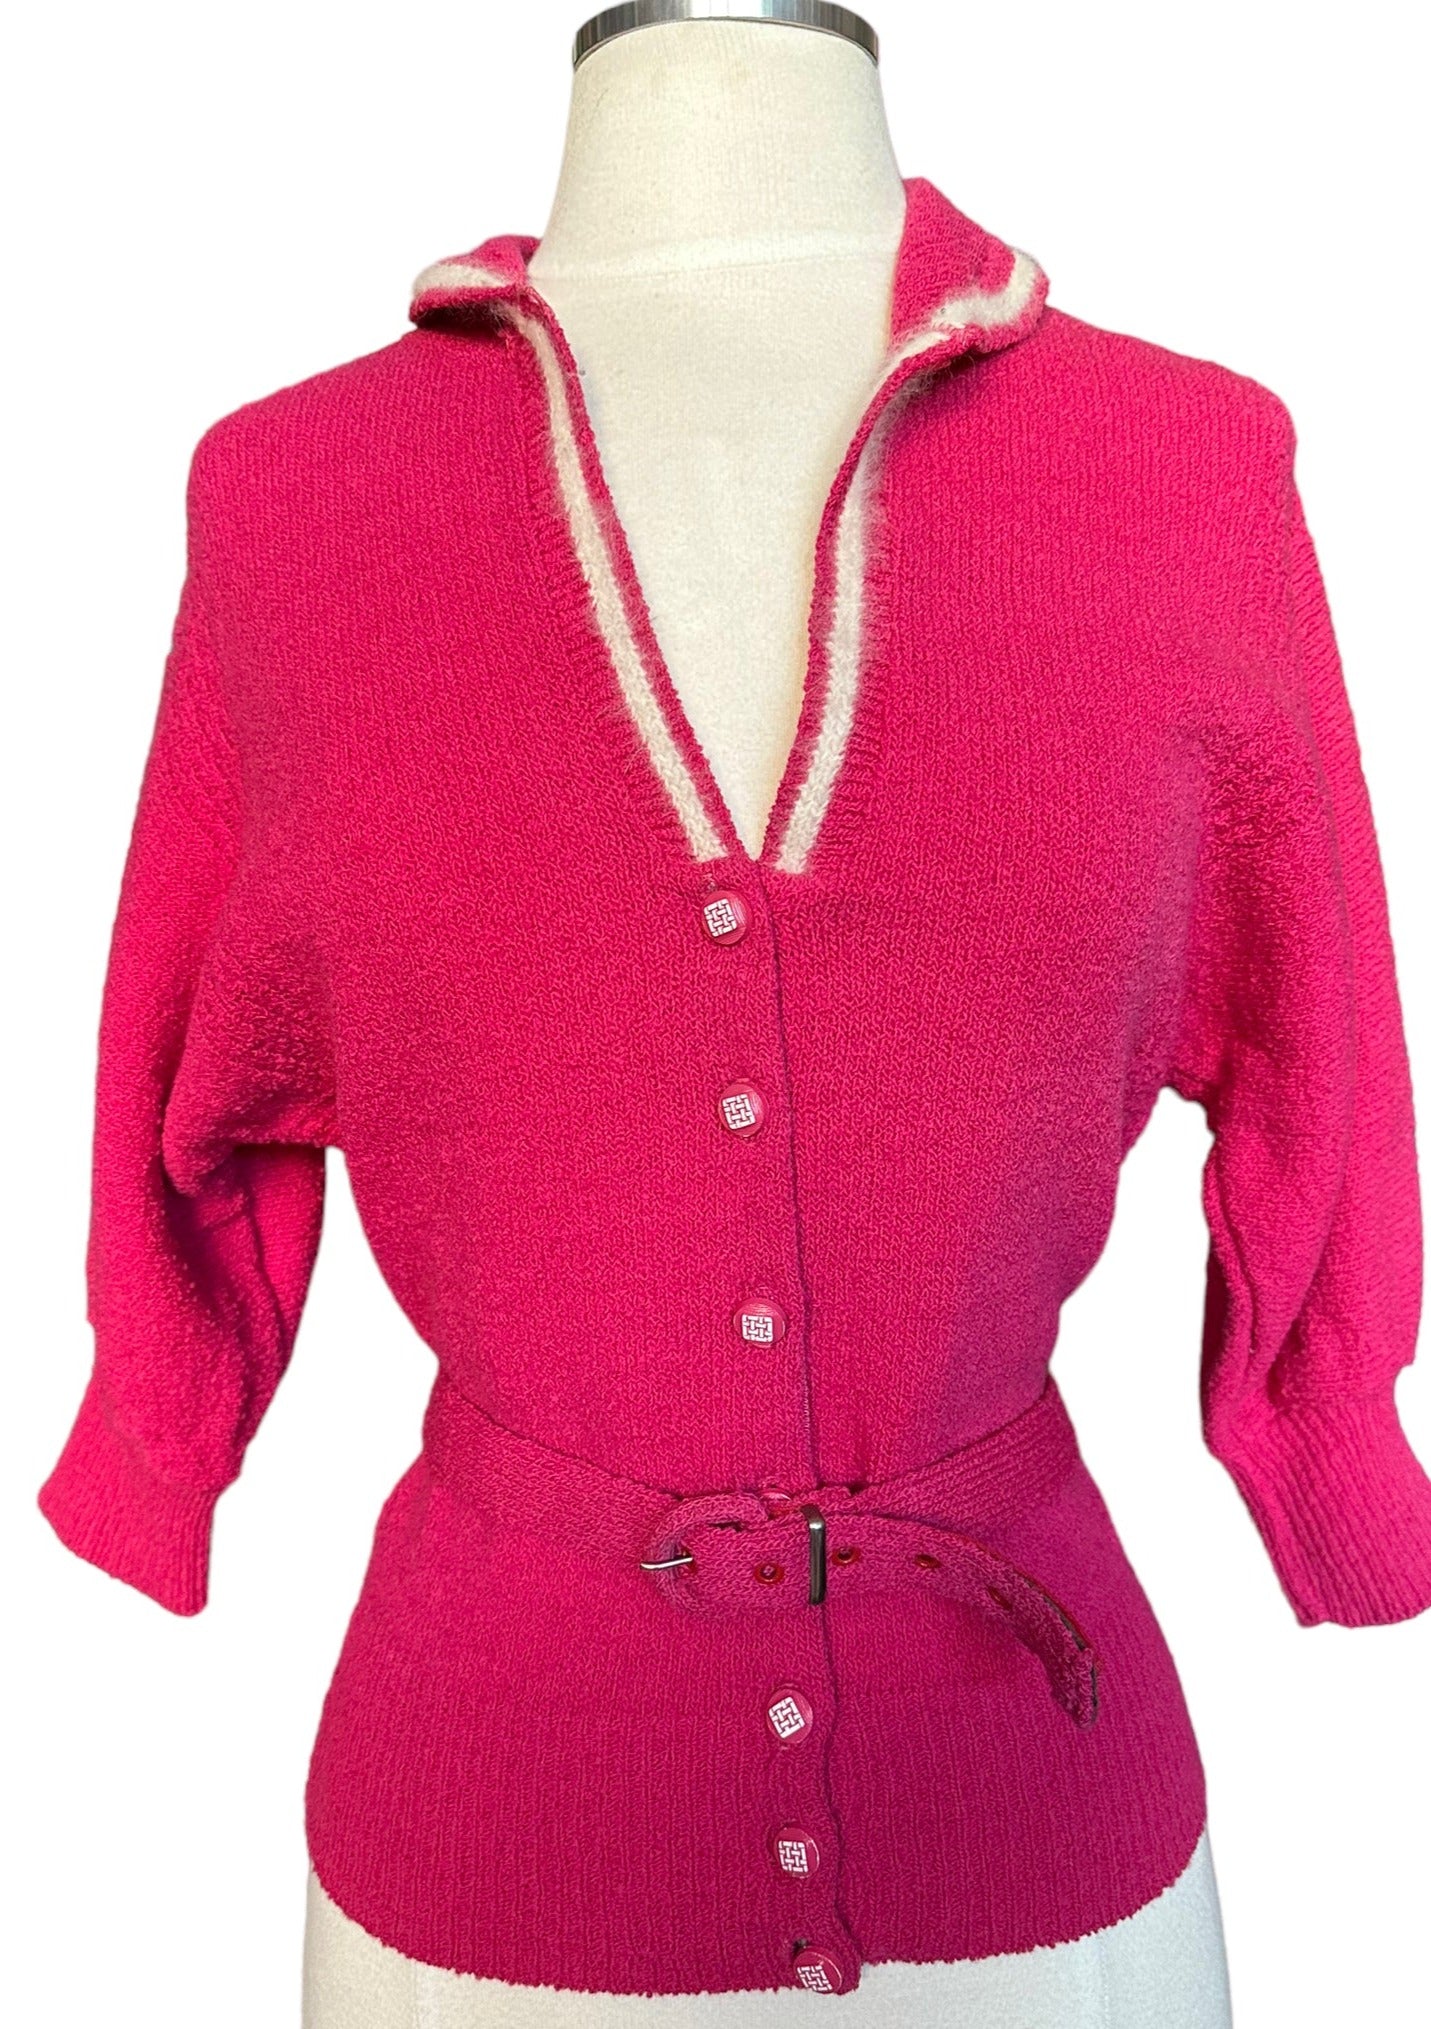 Front open collar Vintage 1950s Pink Sweater With Belt | Vintage Ladies Sweaters | Barn Owl Vintage Seattle